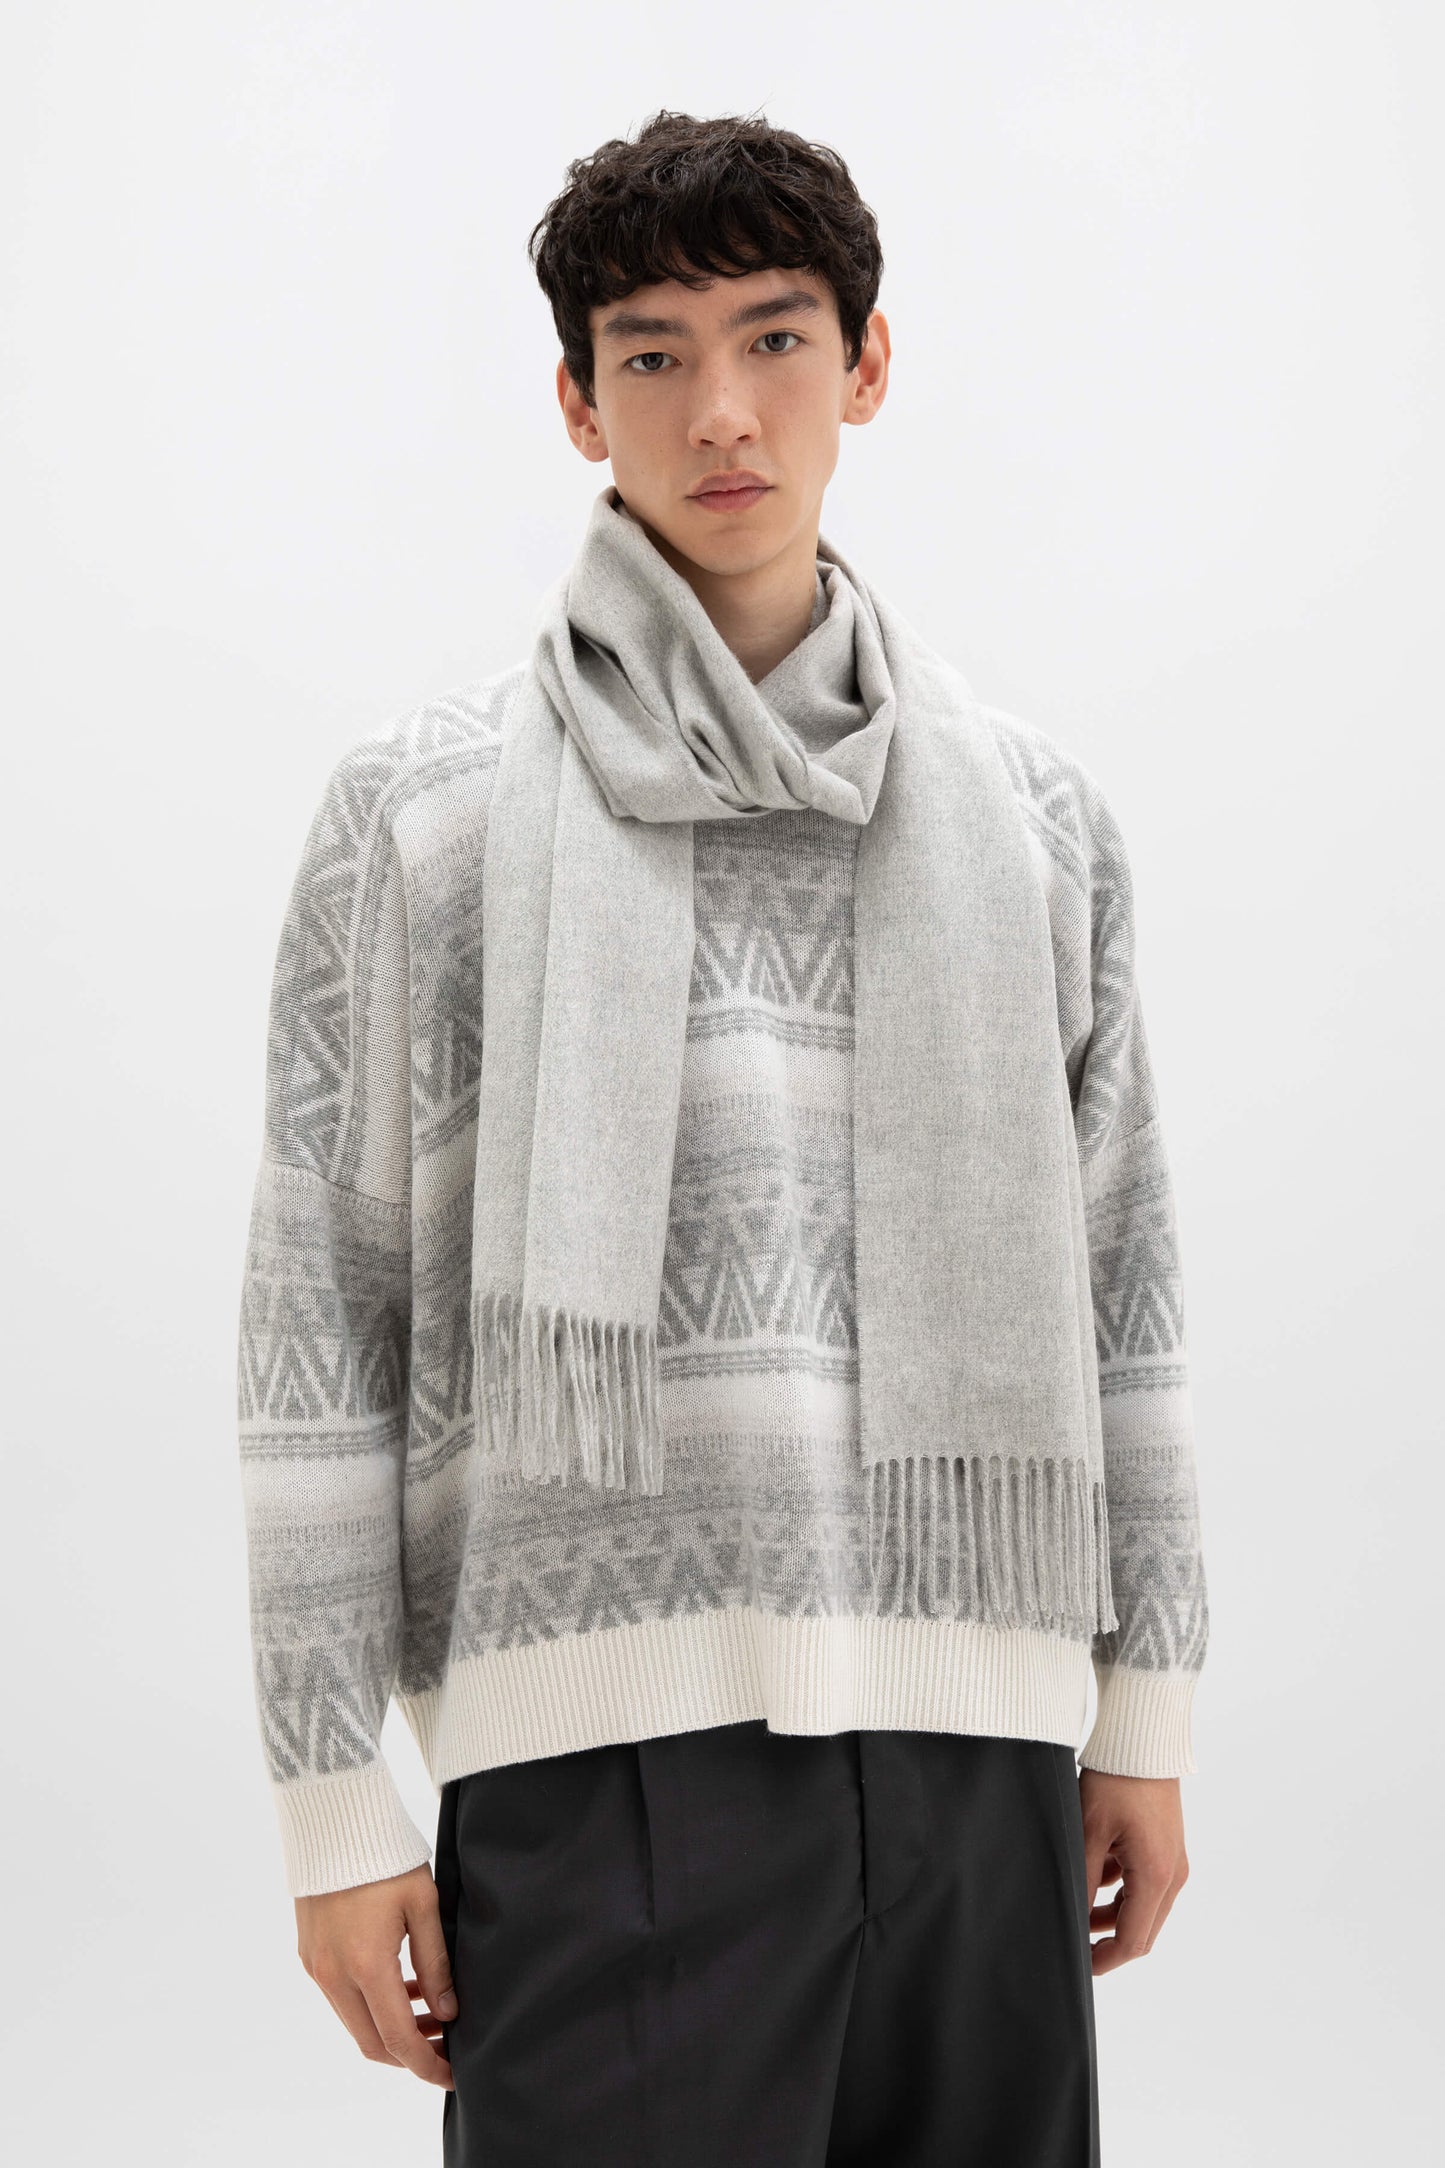 Johnstons of Elgin AW24 Woven Accessory Light Grey Wide Cashmere Scarf WA000057HA0200ONE